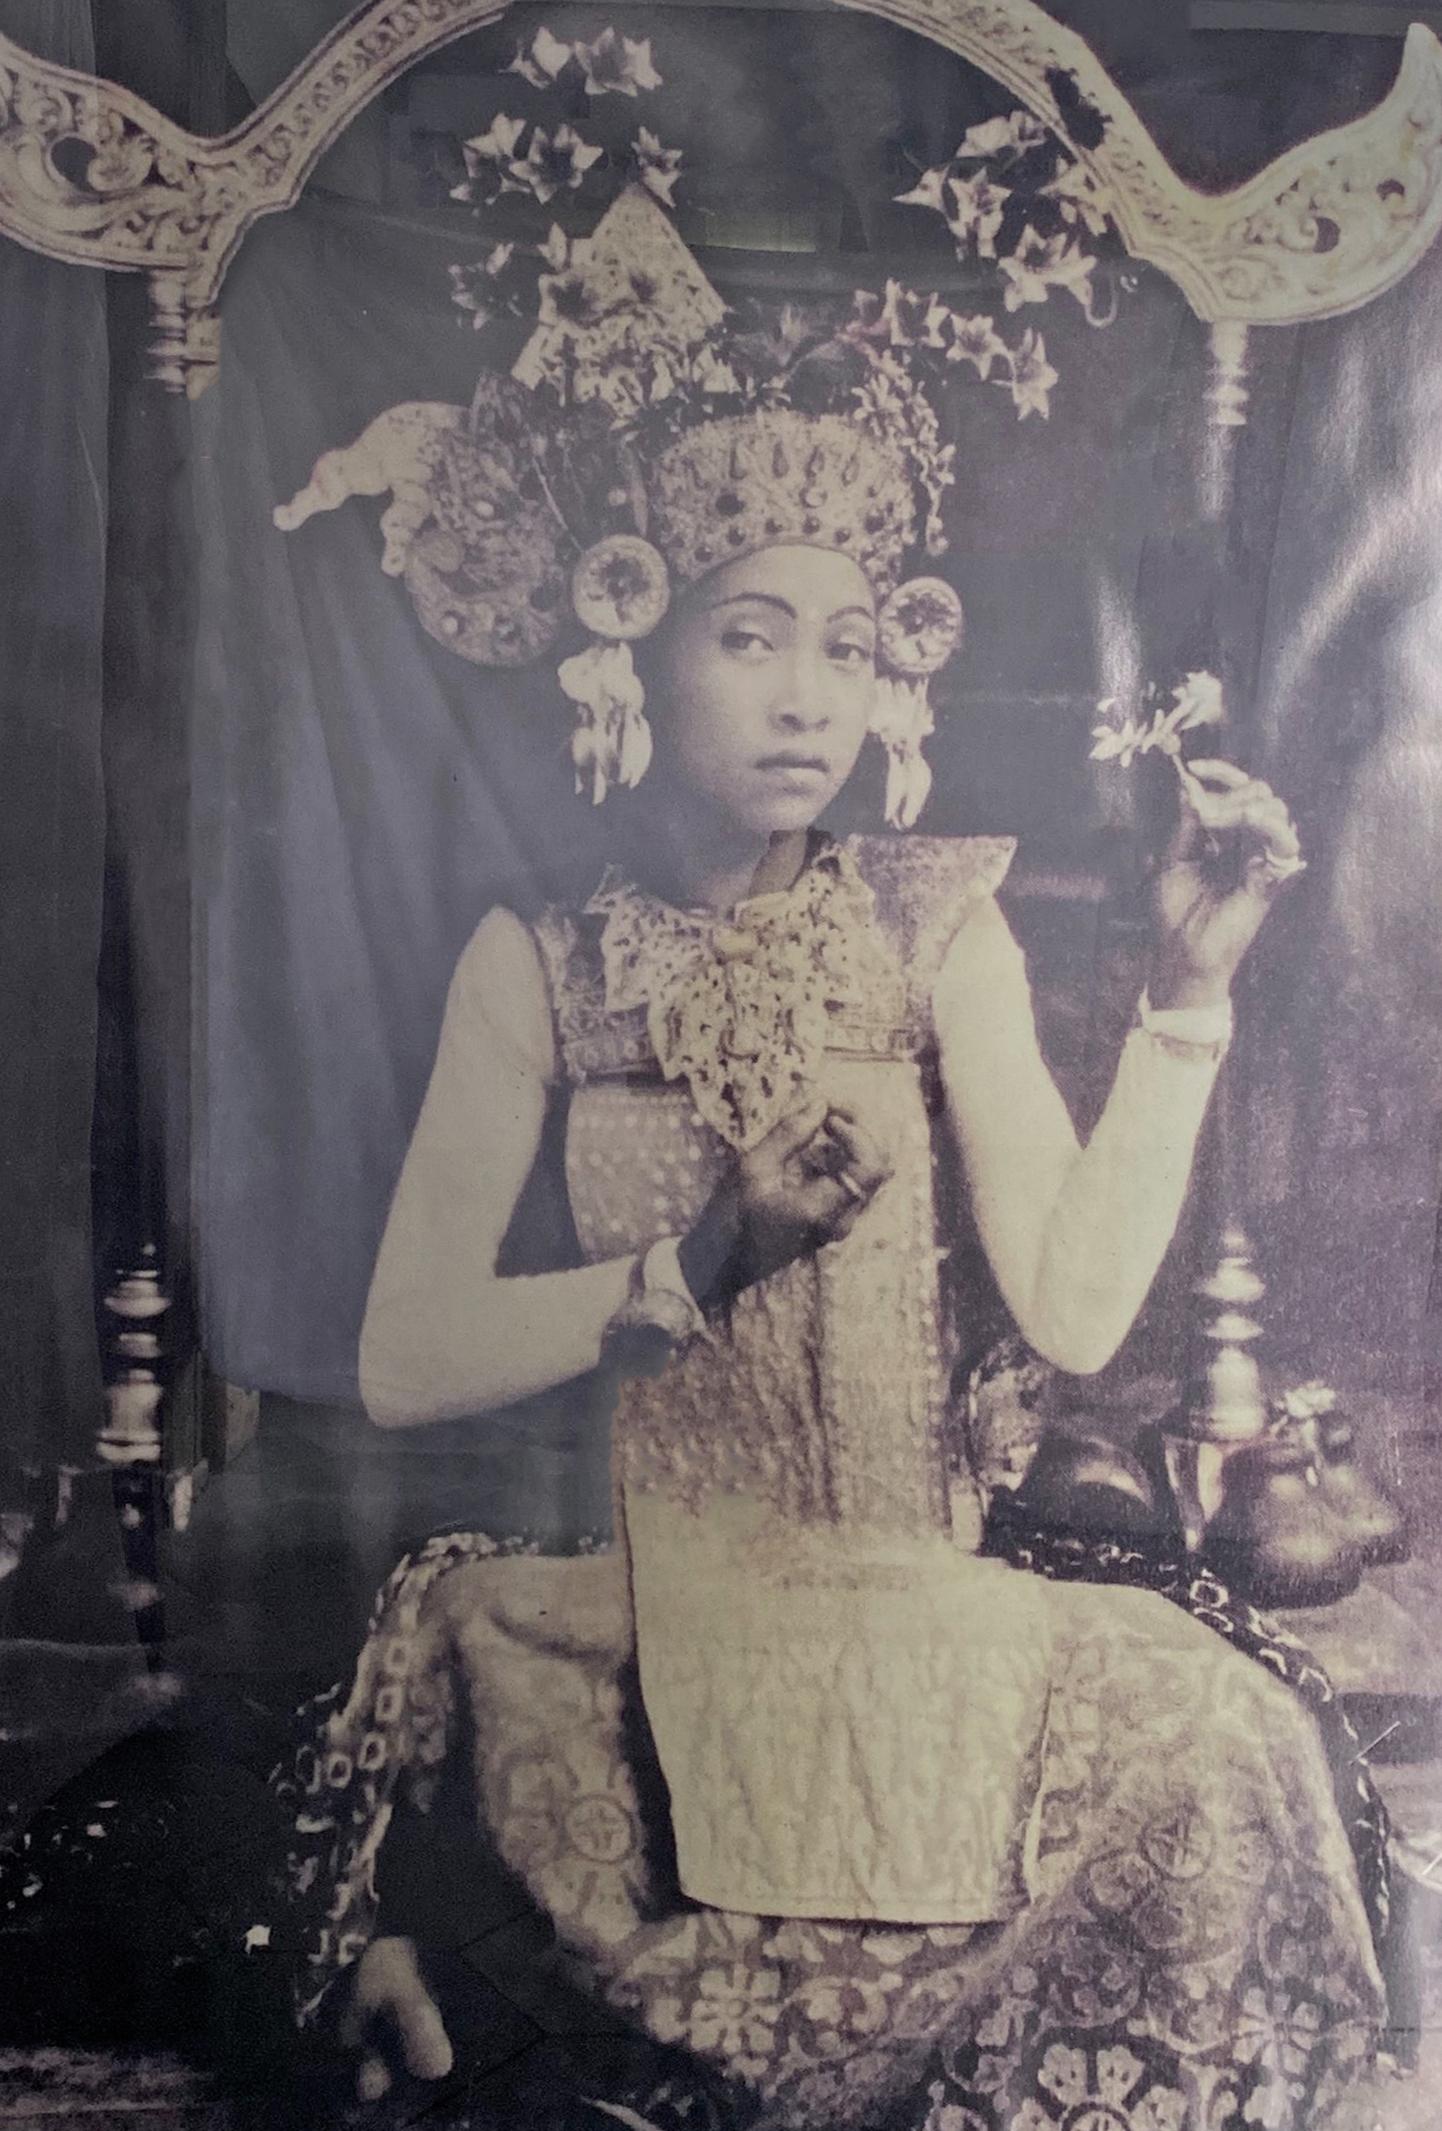 A relatively large photograph from Bali, Indonesia framed in a wood & glass frame. The black & white photo captures a young balinese girl in traditional ceremonial attire. 

Measures: height 163 cm x width 115 cm x depth 2 cm. 

